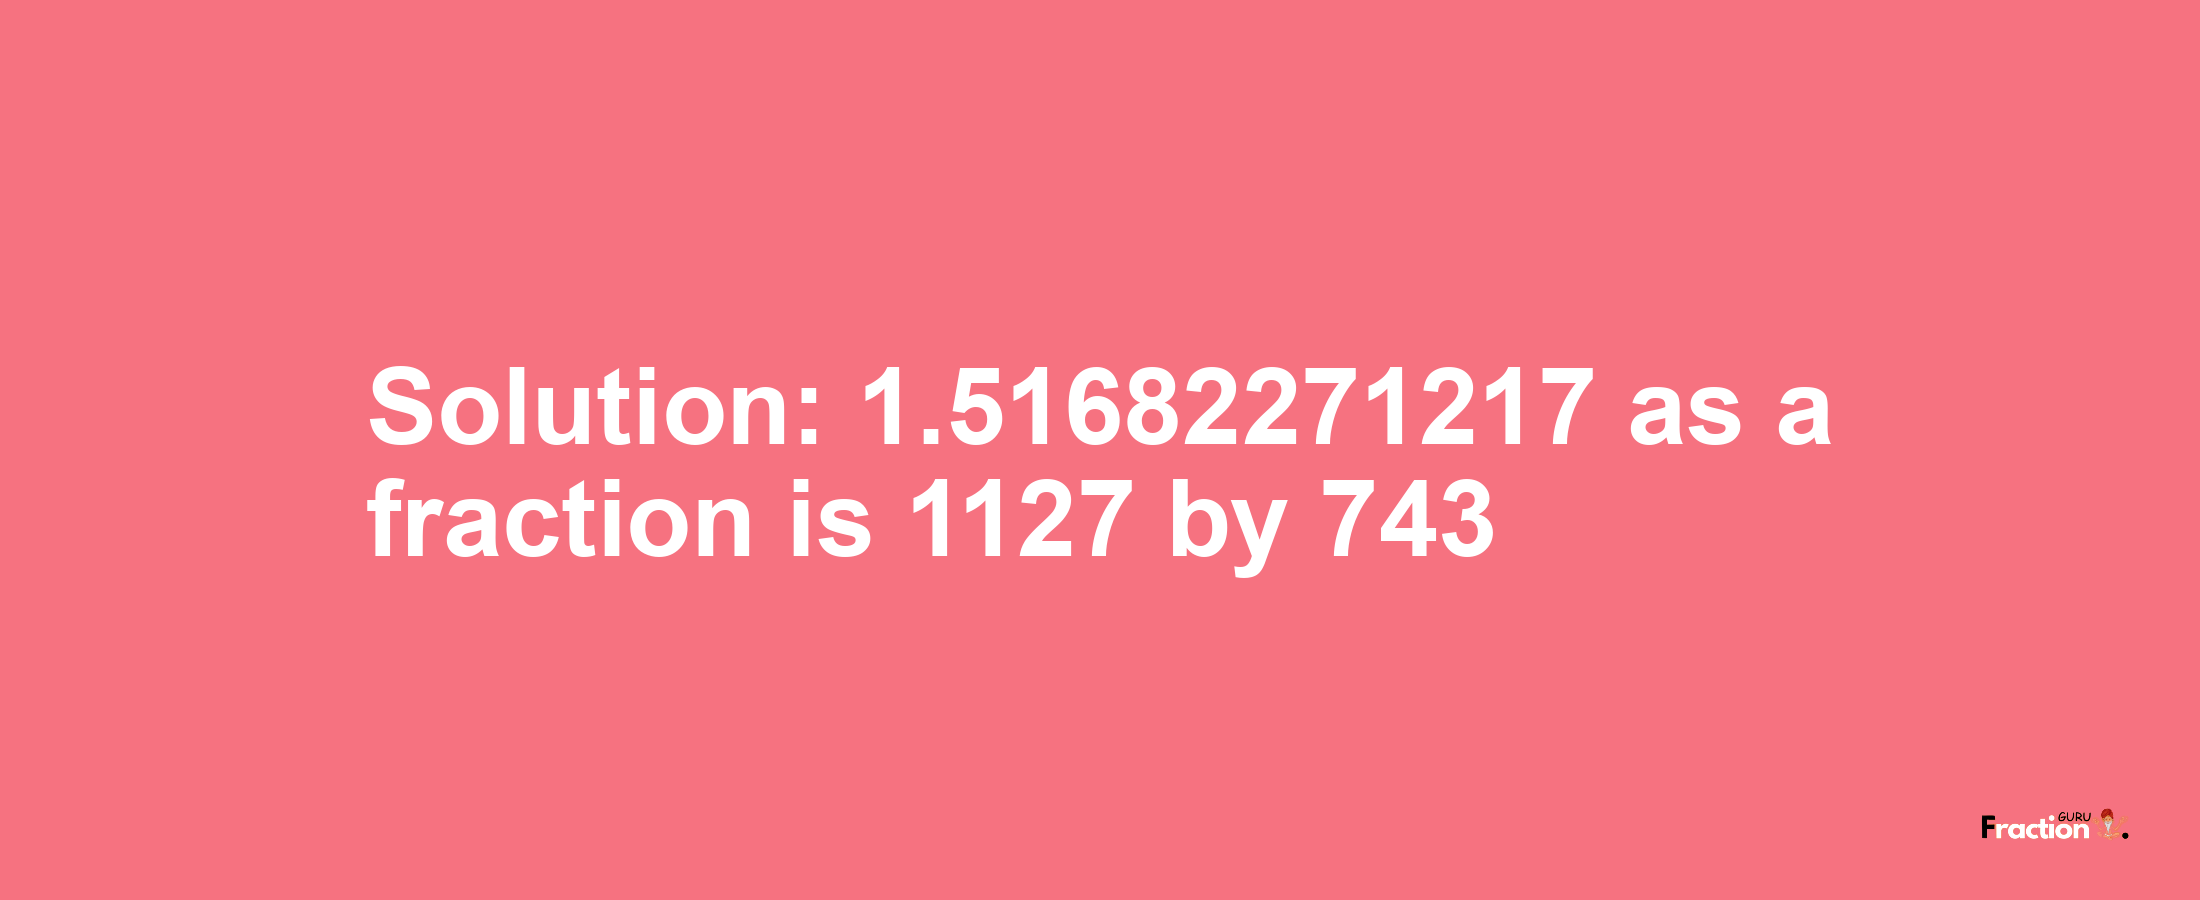 Solution:1.51682271217 as a fraction is 1127/743